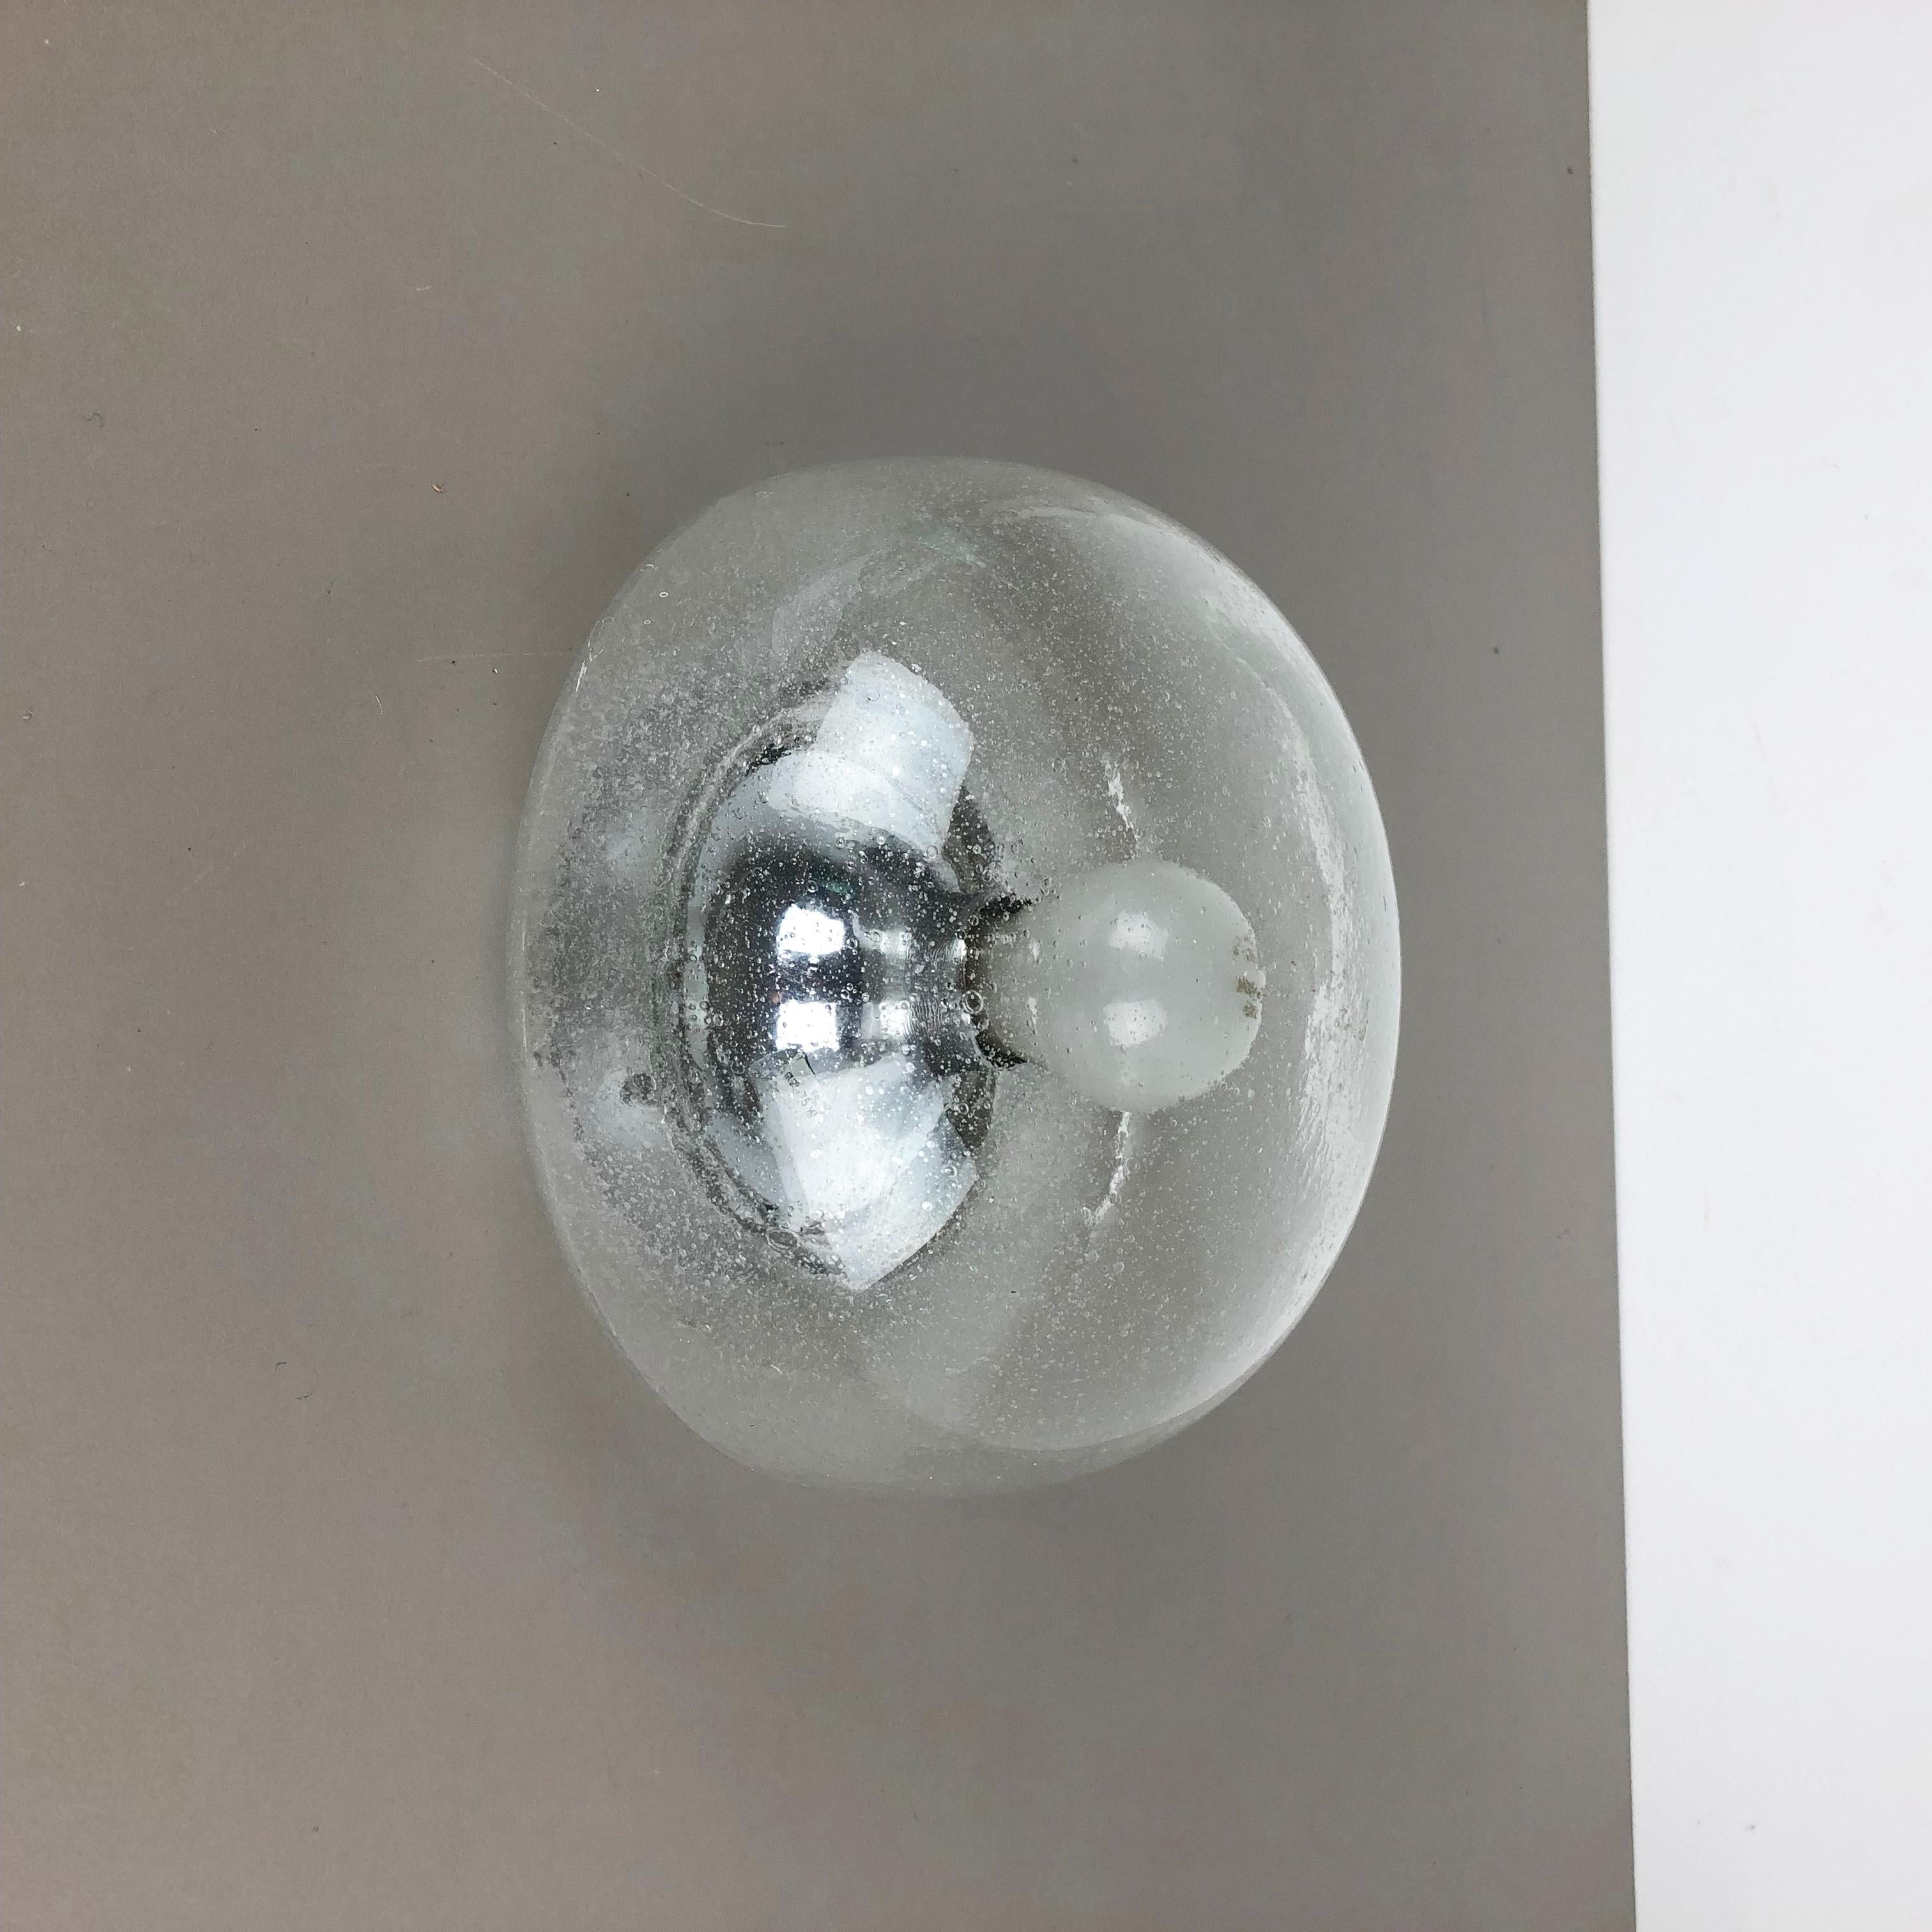 Article:

Wall light sconce


Producer:

Hillebrand Leuchten, Germany



Origin:

Germany



Age:

1970s



Original modernist German wall light made of high quality glass in cone form and clear glass bubble structure with a